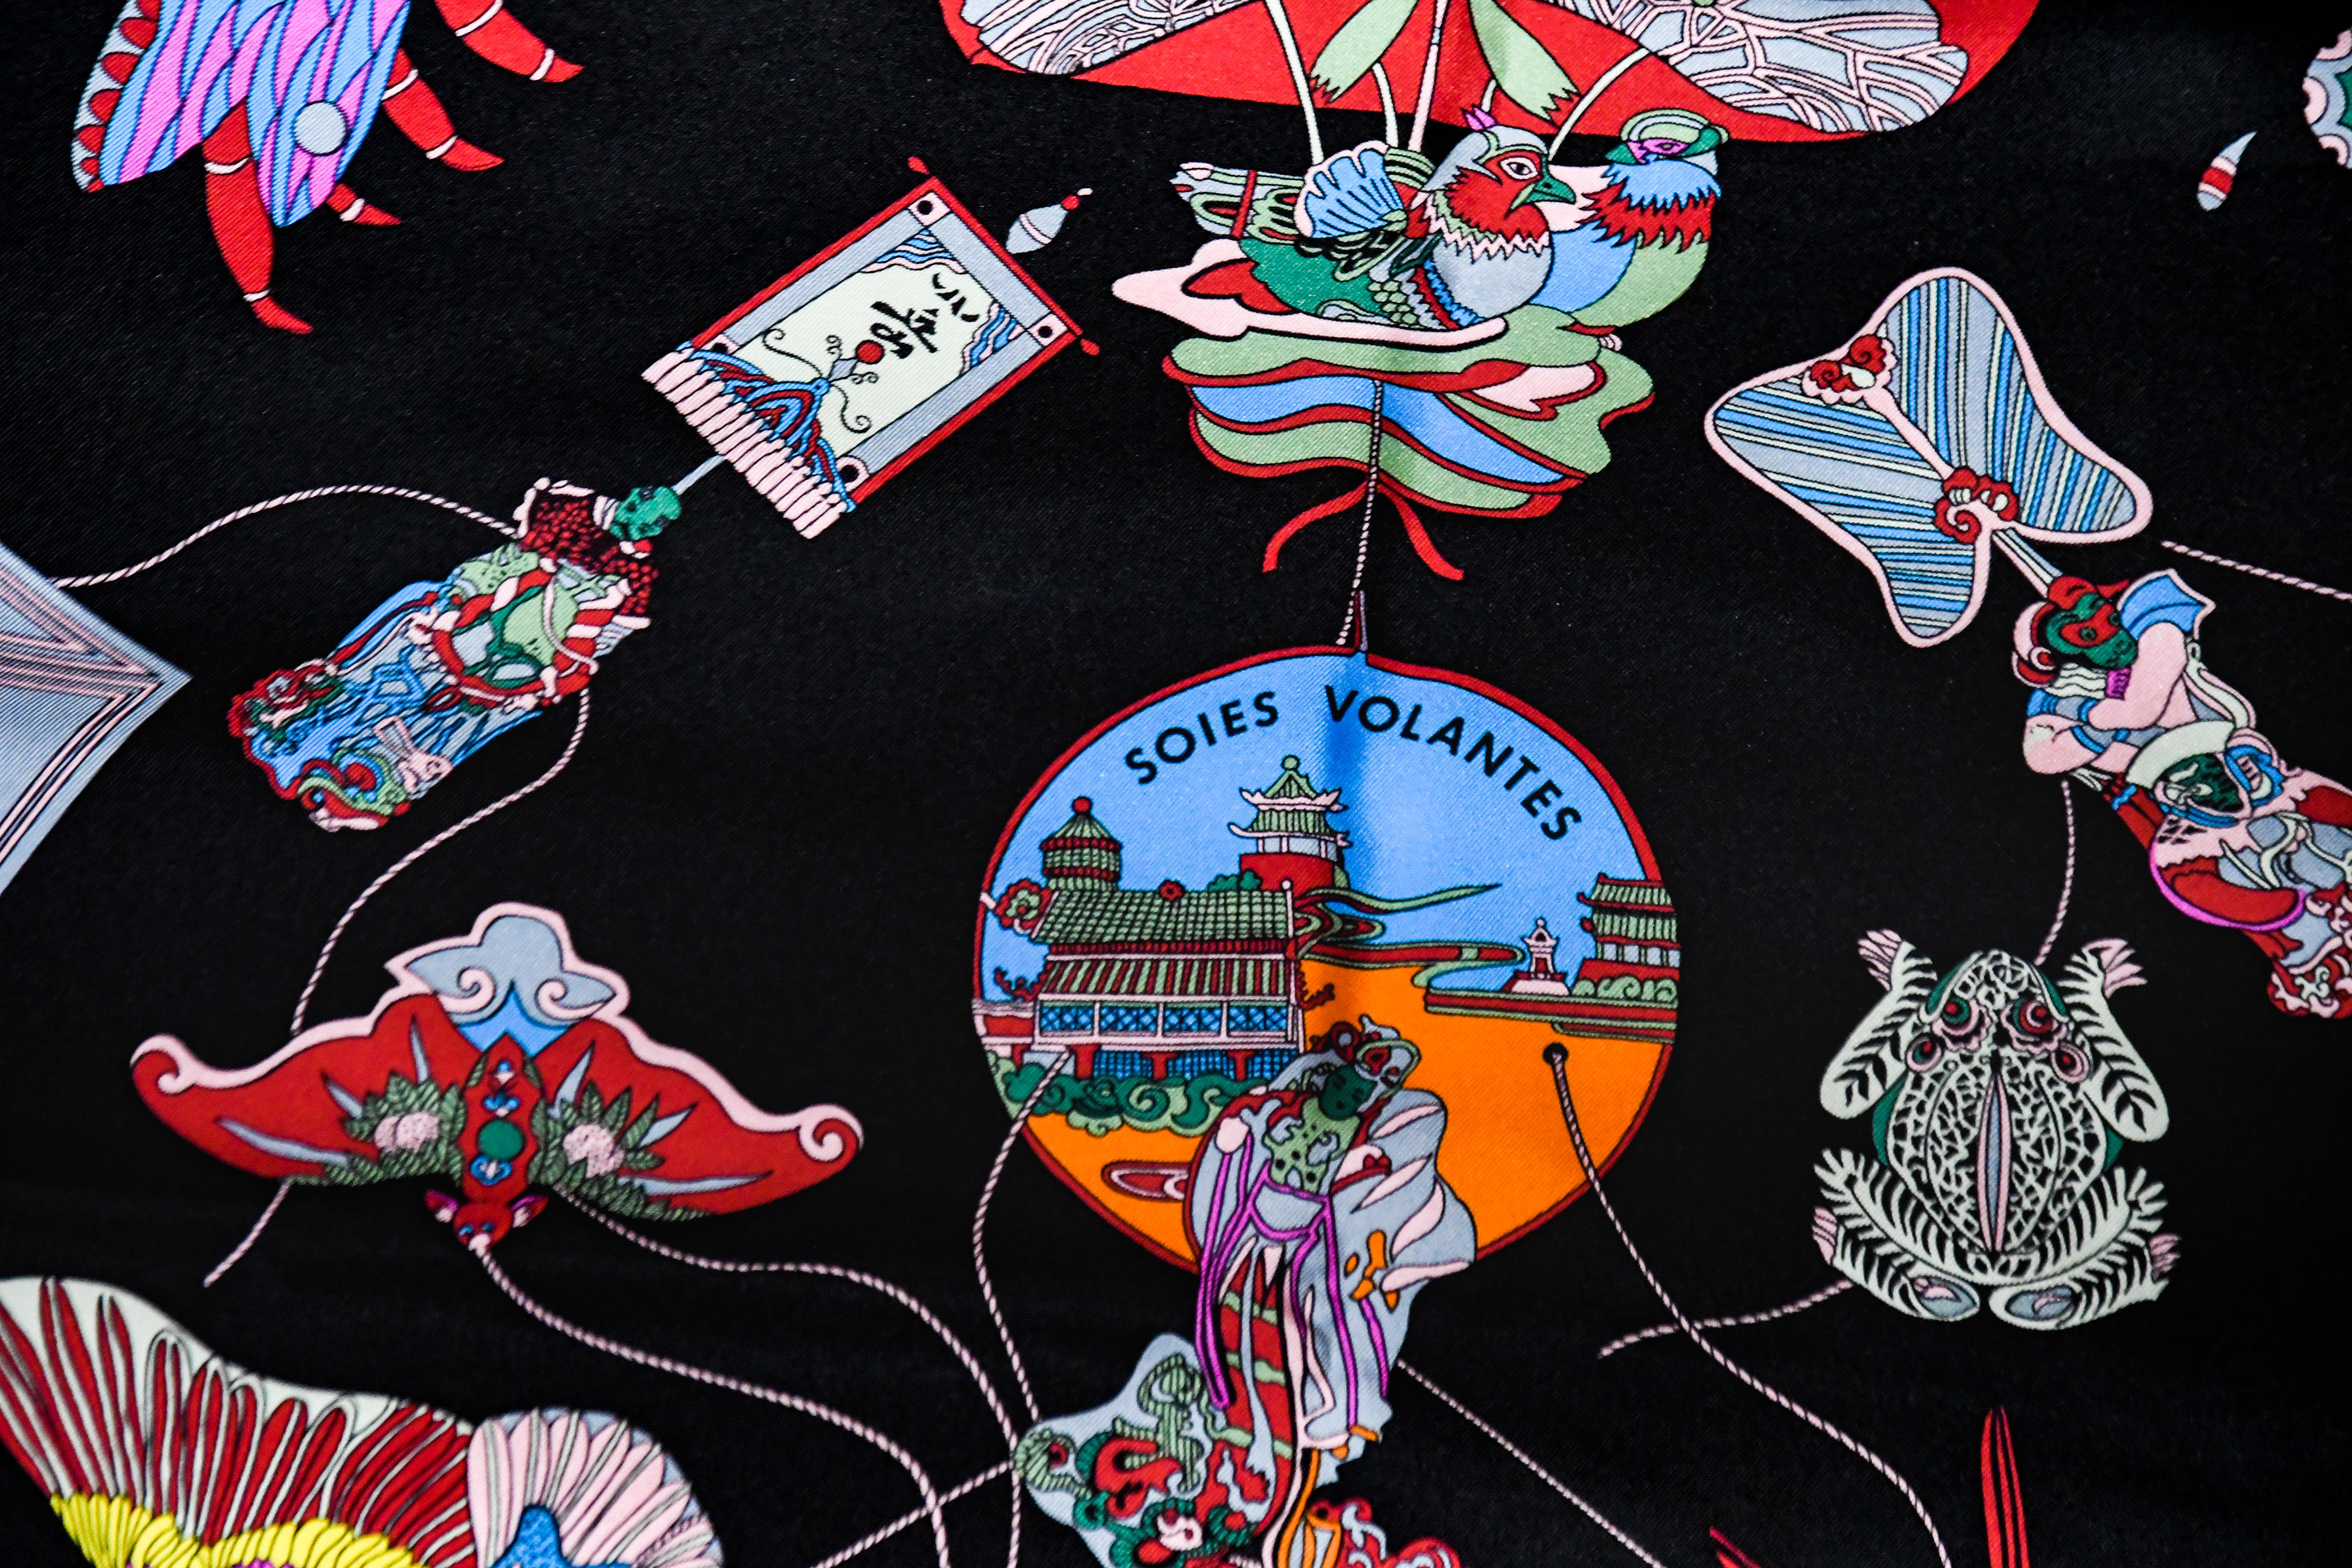 This silk scarf has amazingly vivid colors of decorative Chinese kites against a black background  framed in orange and yellow trim.  This Chinese kites theme silk scarf depicts a variety of butterflies, birds and chinese motif decorations.  This